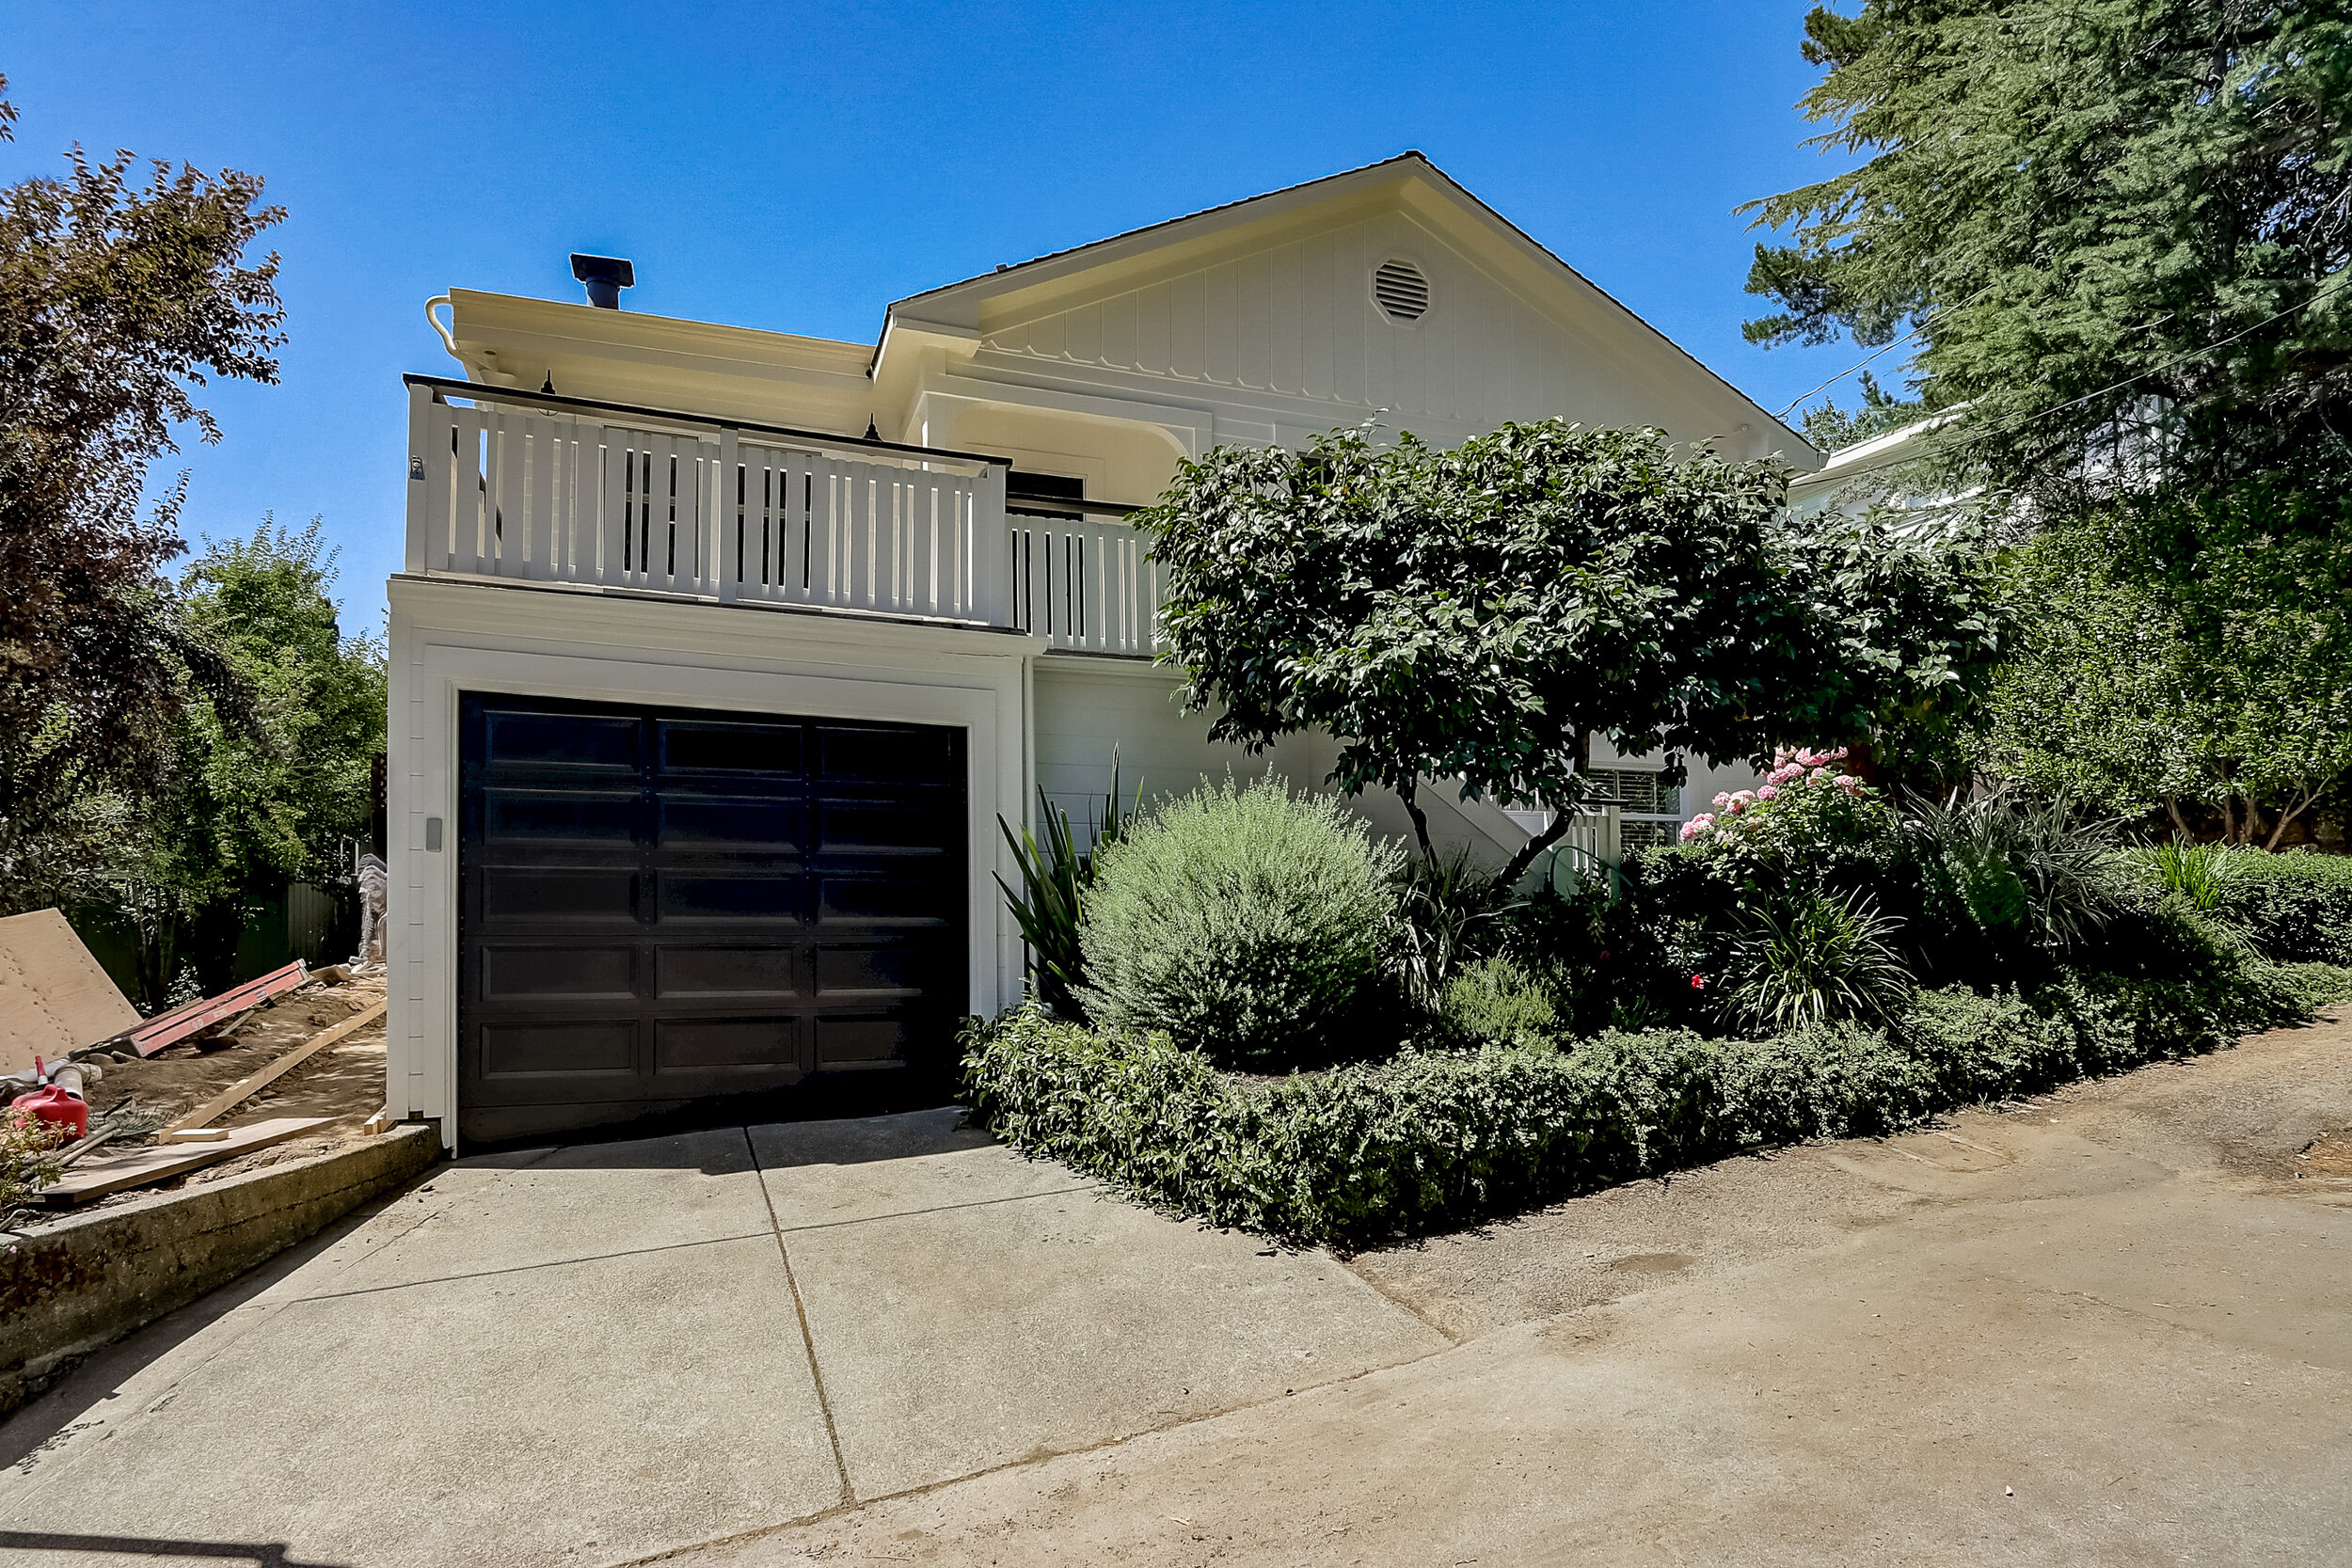 Own Marin Barr Haney Whitney Potter For Sale 9 Terrace Avenue, Kentfield California Marin County #1 Real Esate Agents-35.jpg